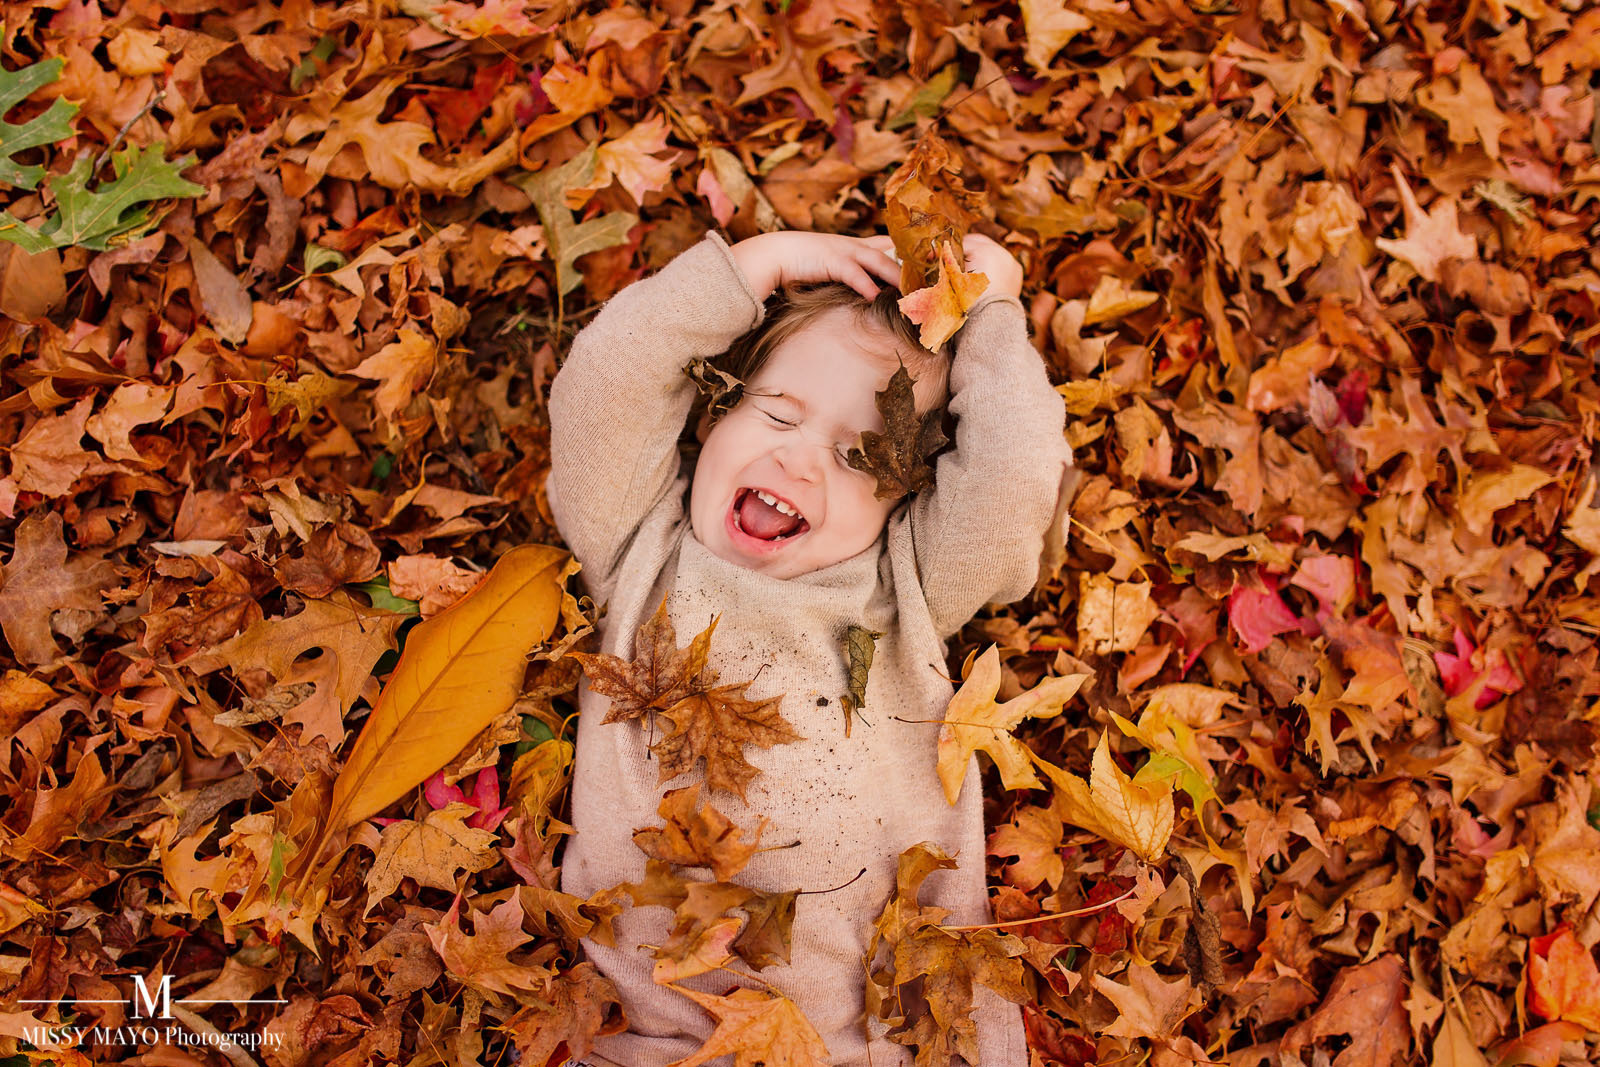 baby in a leaf pile by Missy Mayo